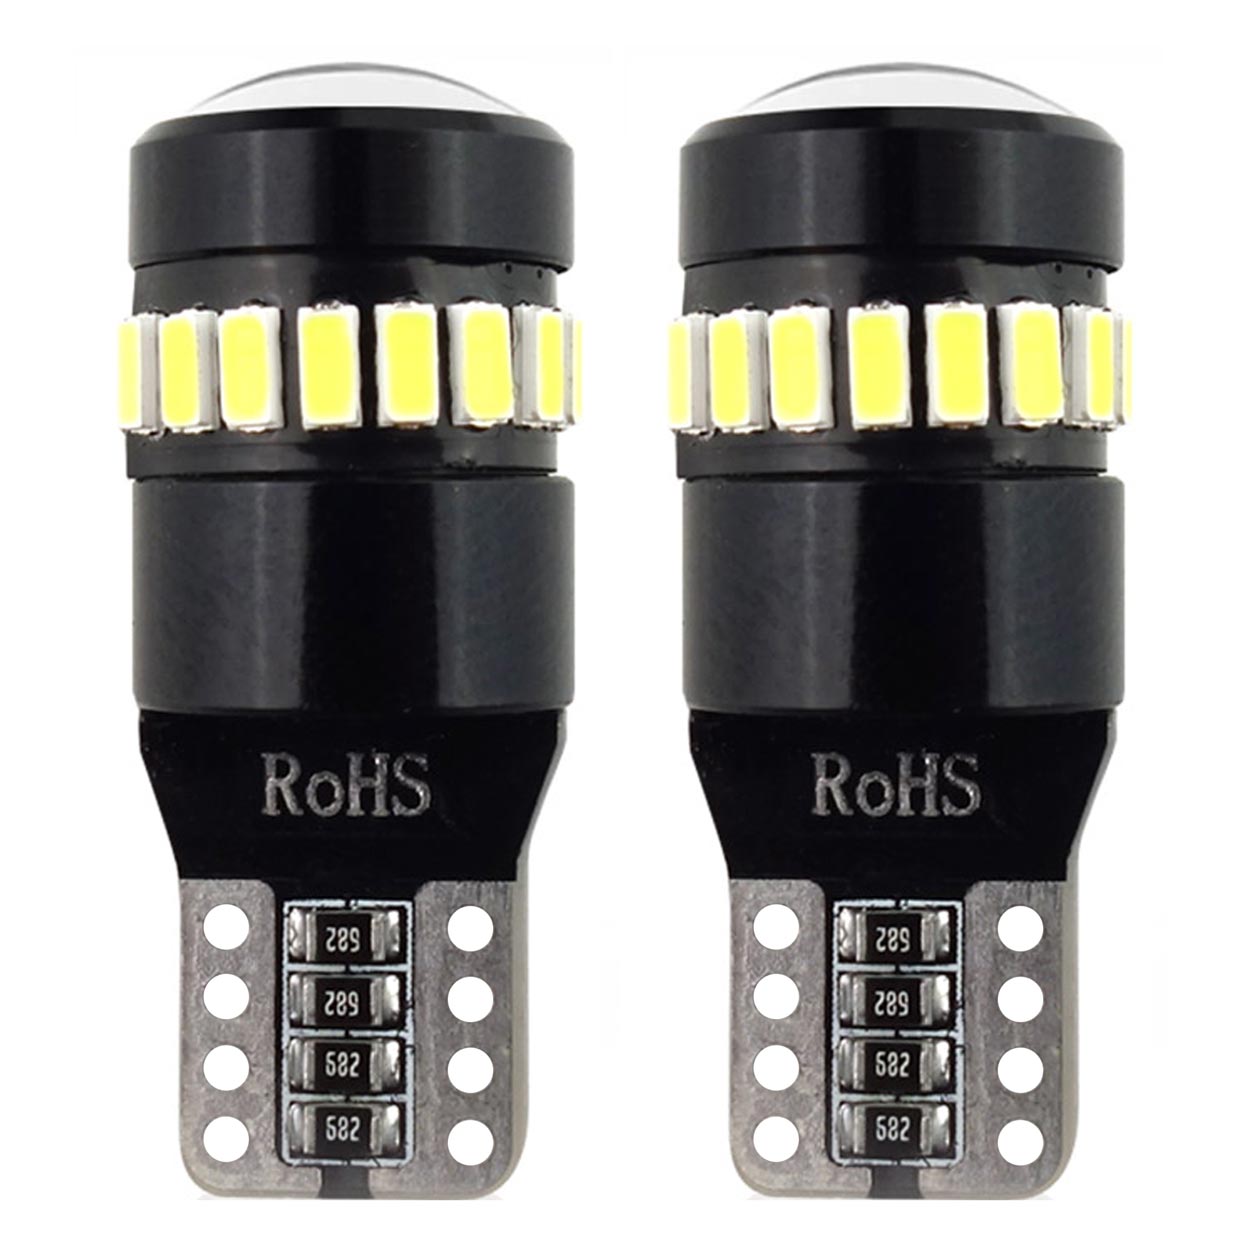 Bec Led 18SMD 3014 plus 1SMD 12/24V Pozitie, W5W, T10 Canbus 2buc - Alb thumb